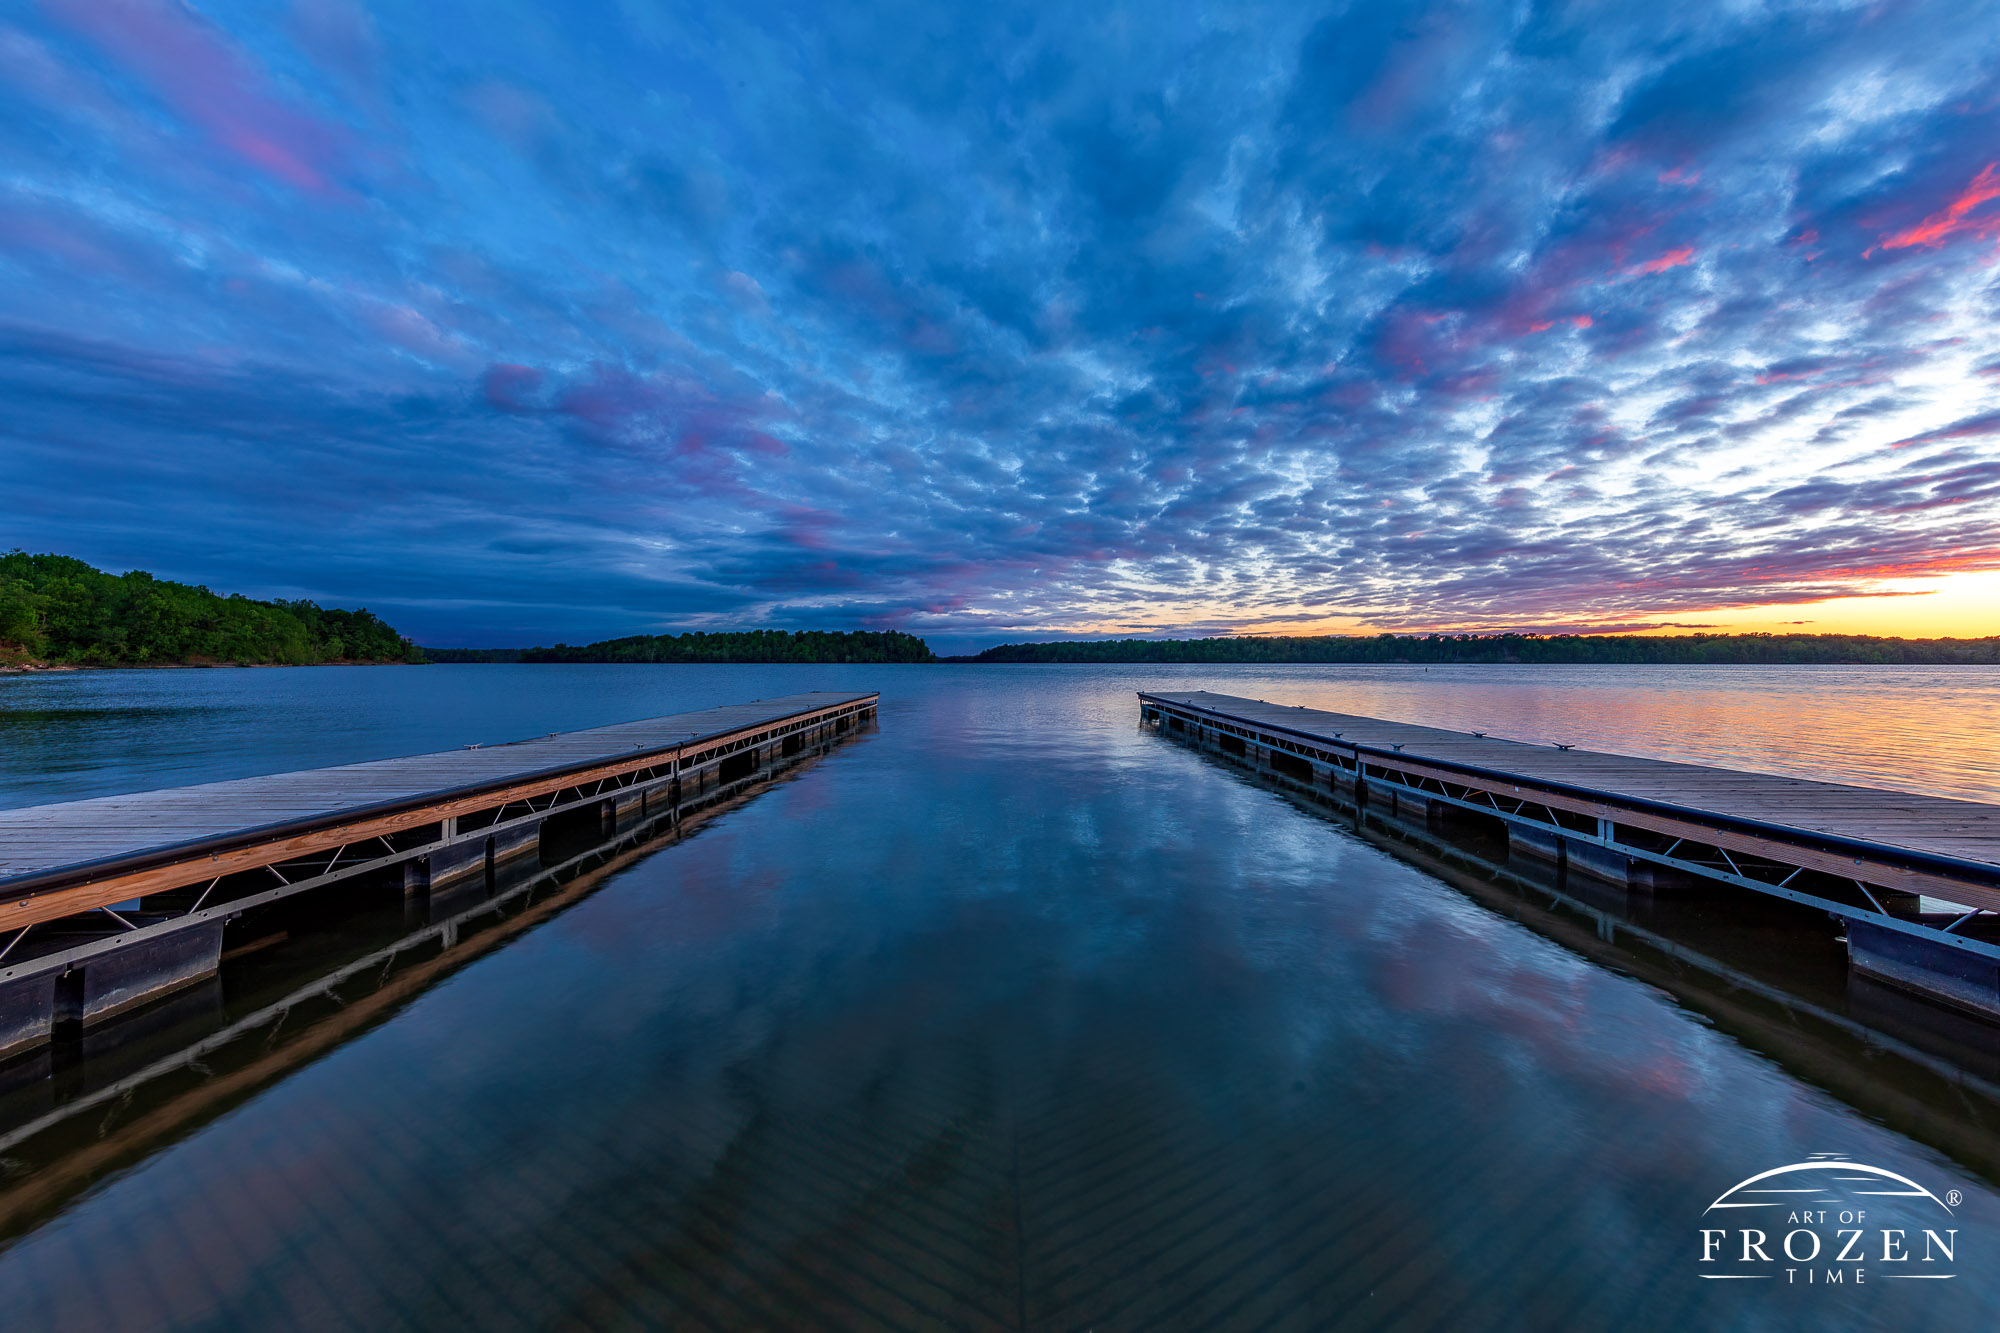 A colorful sunset over Caesar Creek State Park where the setting sun illuminated the parting clouds from underneath as twilight approached and two boat docks stretch outward into the calm waters.